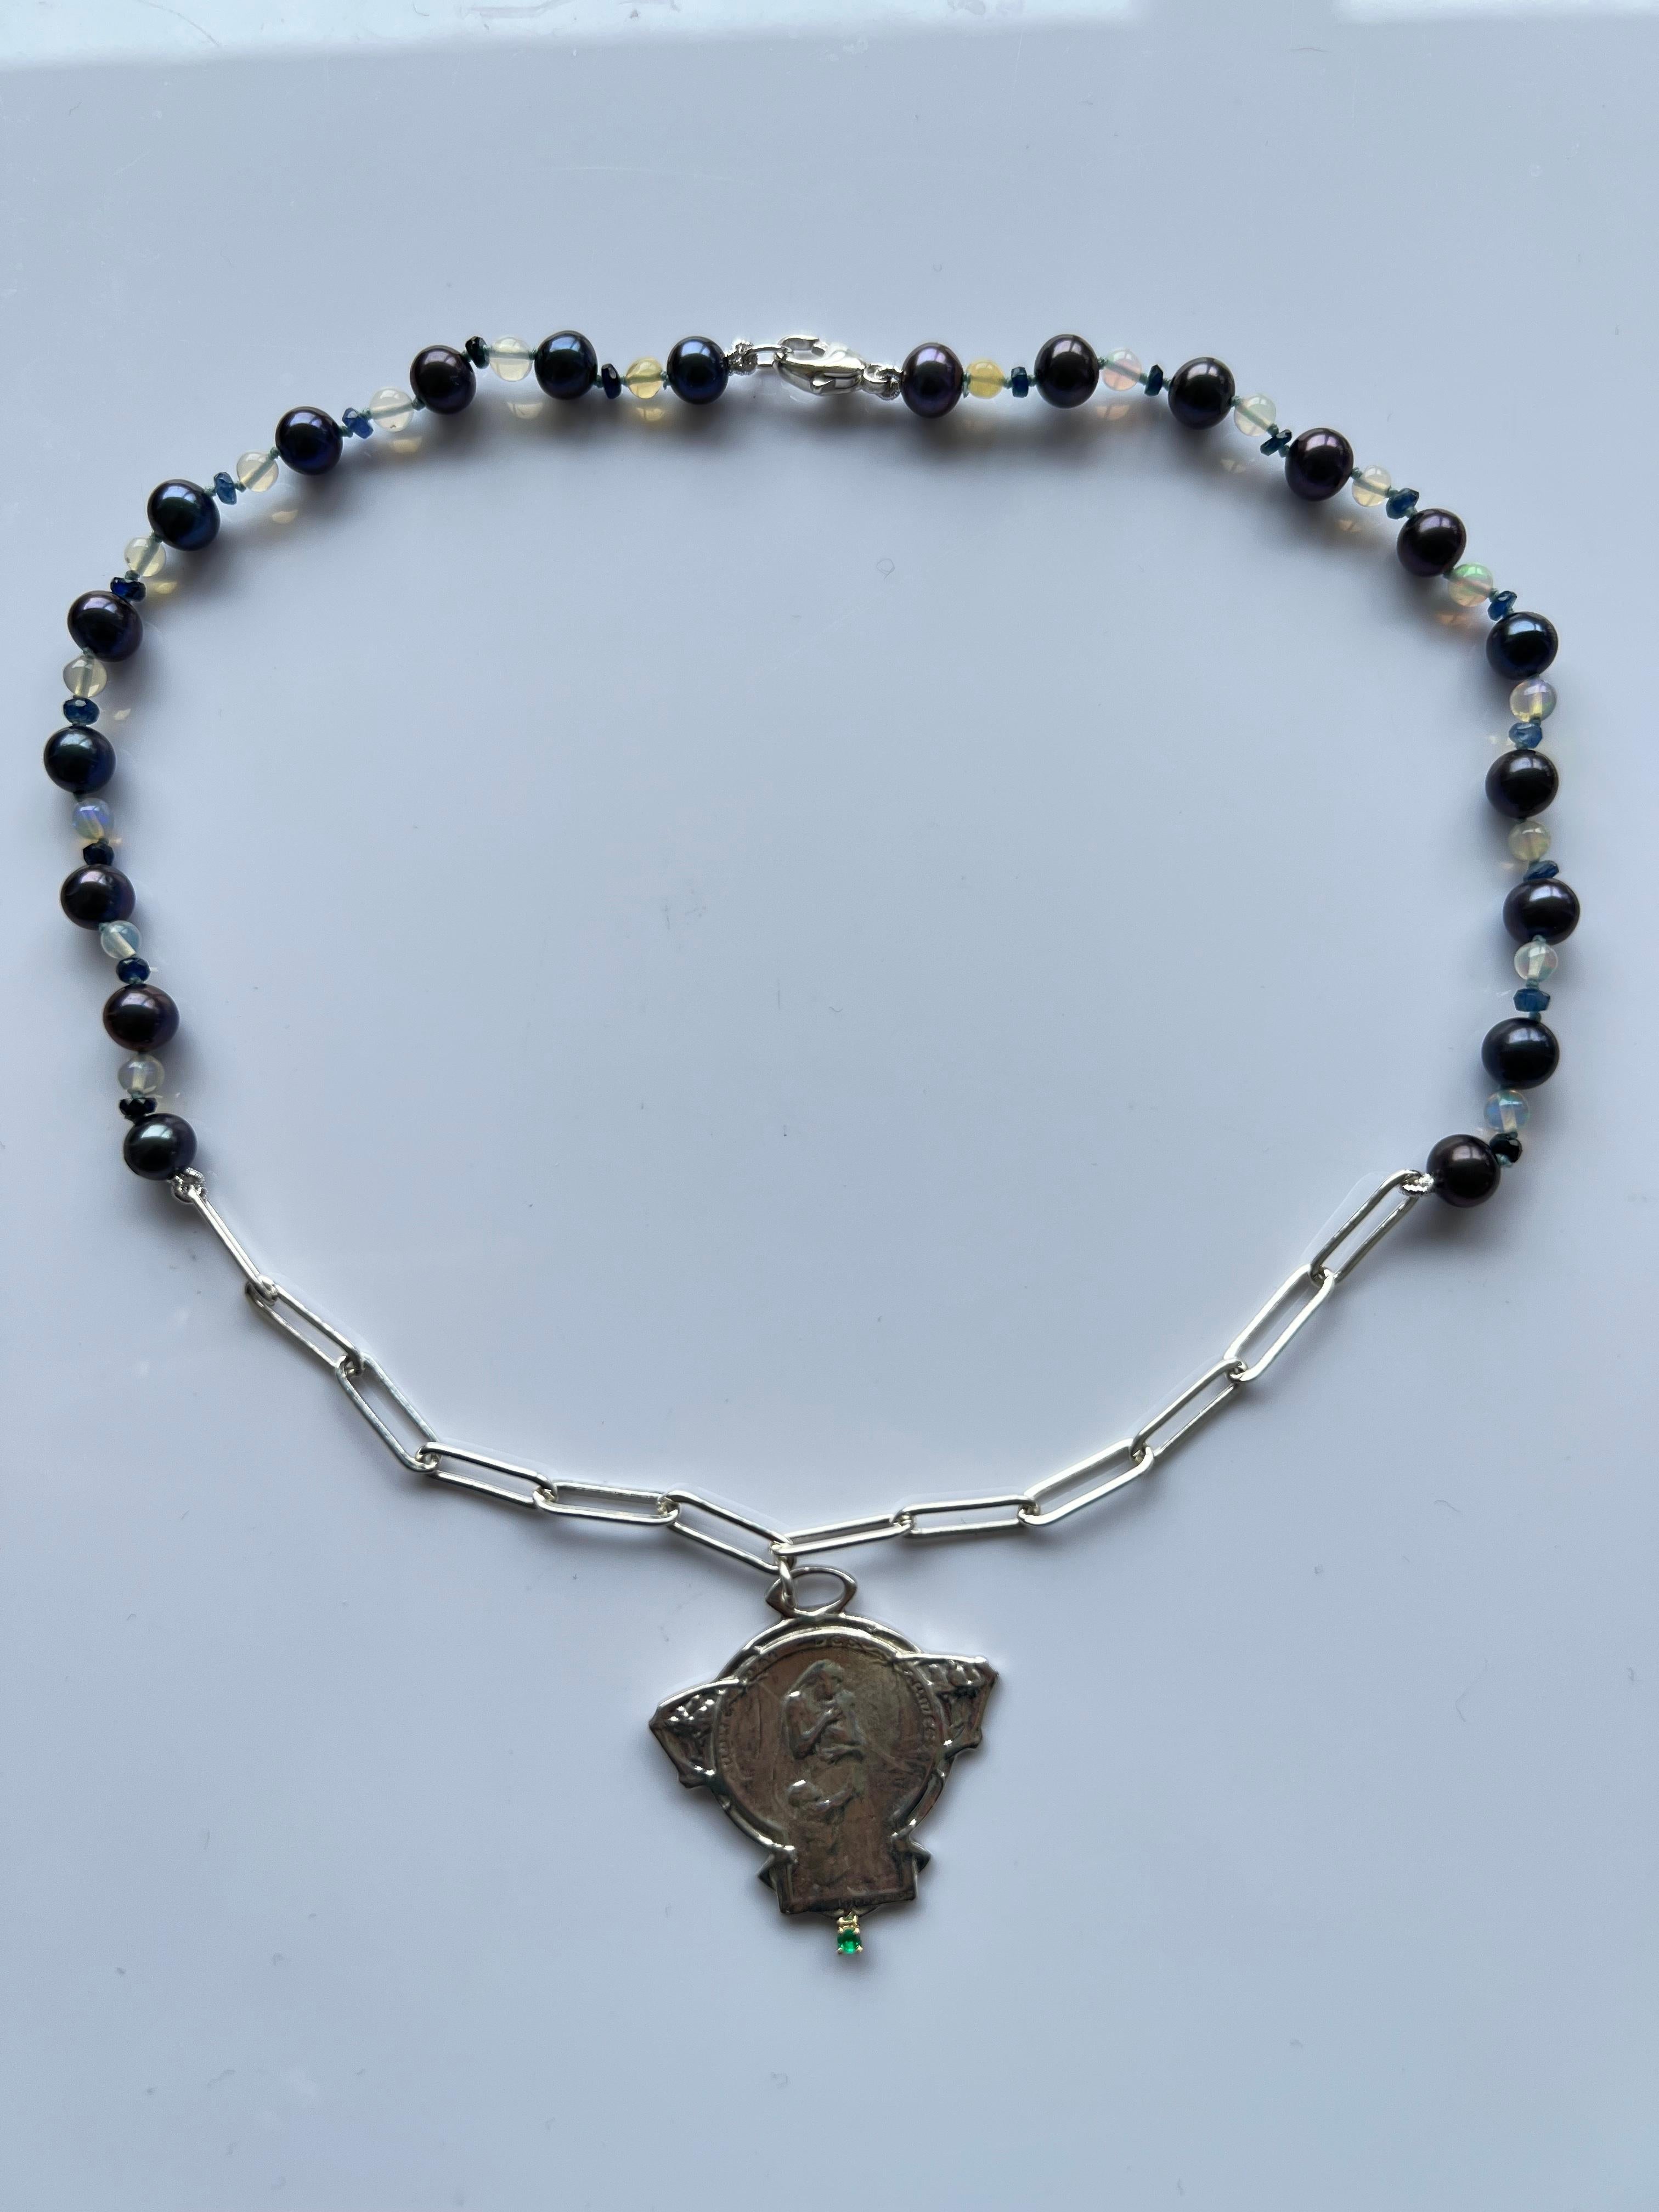 Emerald Set Medal Virgin Mary Black Pearl Opal and Blue Sapphire Choker Necklace Silver Chain  J Dauphin

Symbols or medals can become a powerful tool in our arsenal for the spiritual. 
Since ancient times spiritual pendants, religious medals has